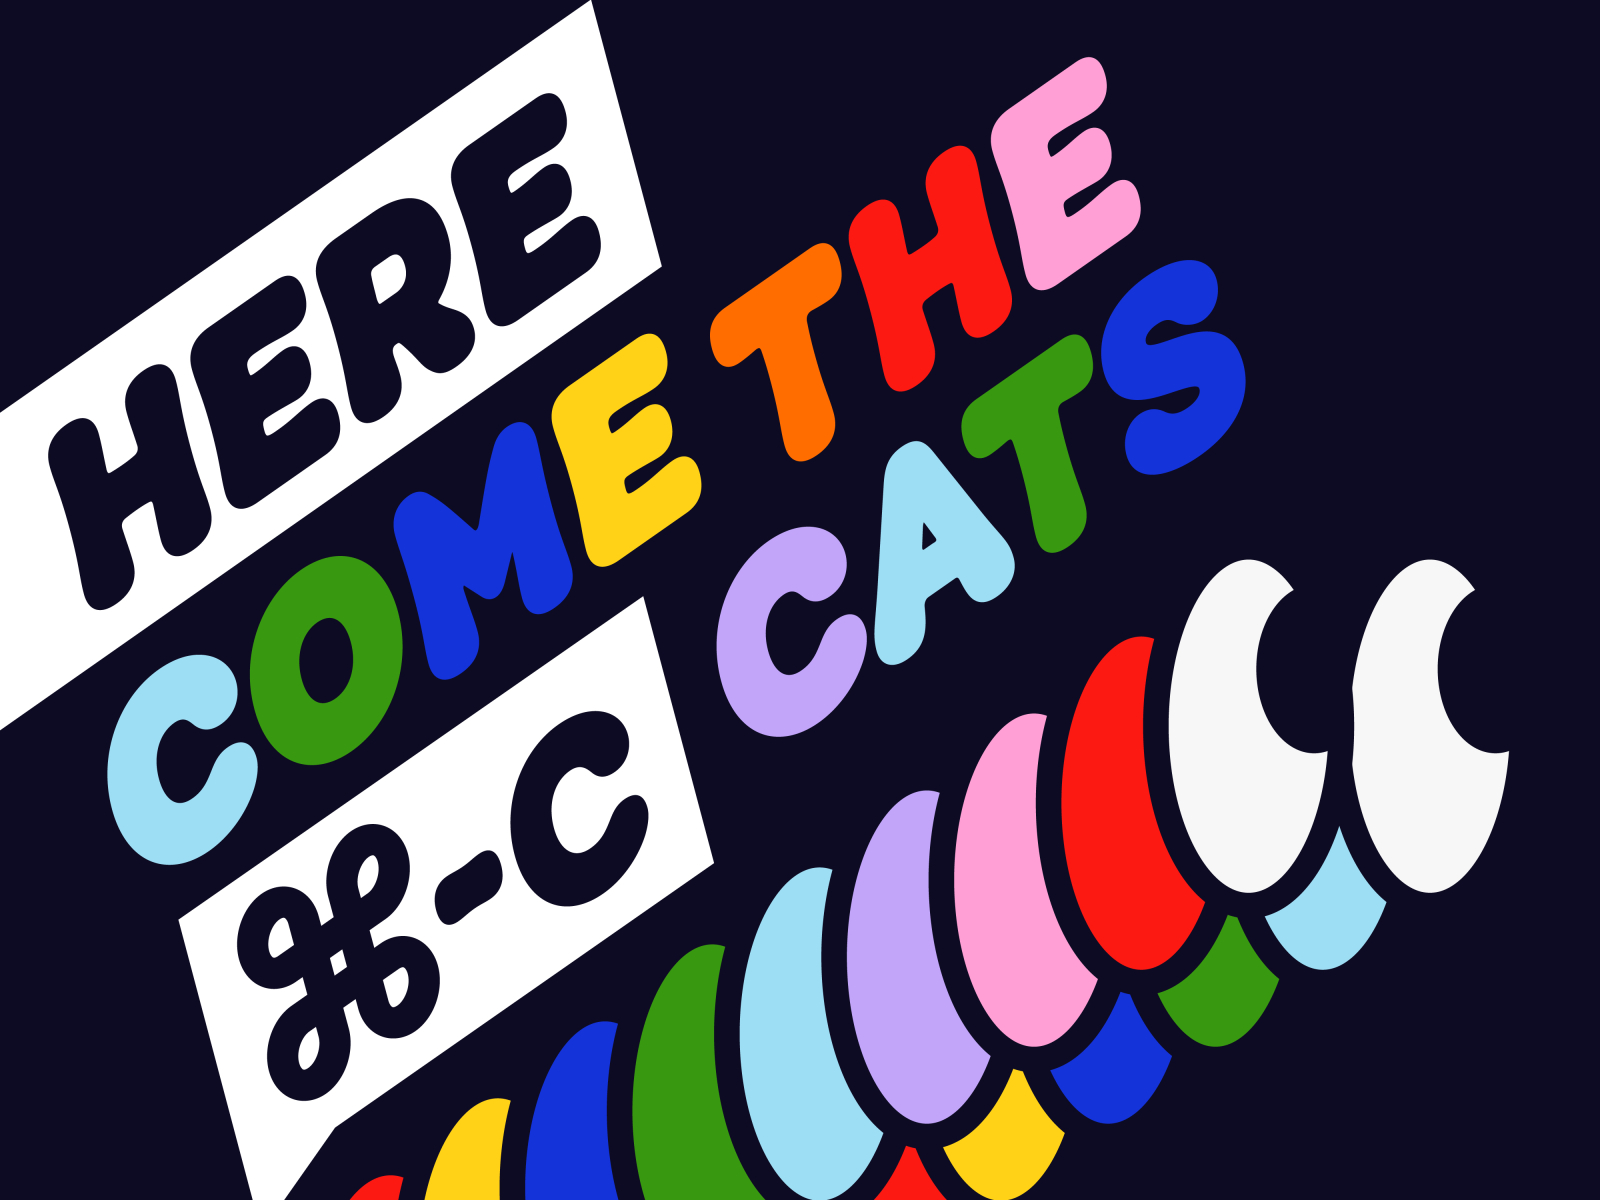 Overtime: Here Come The ⌘-C Cats